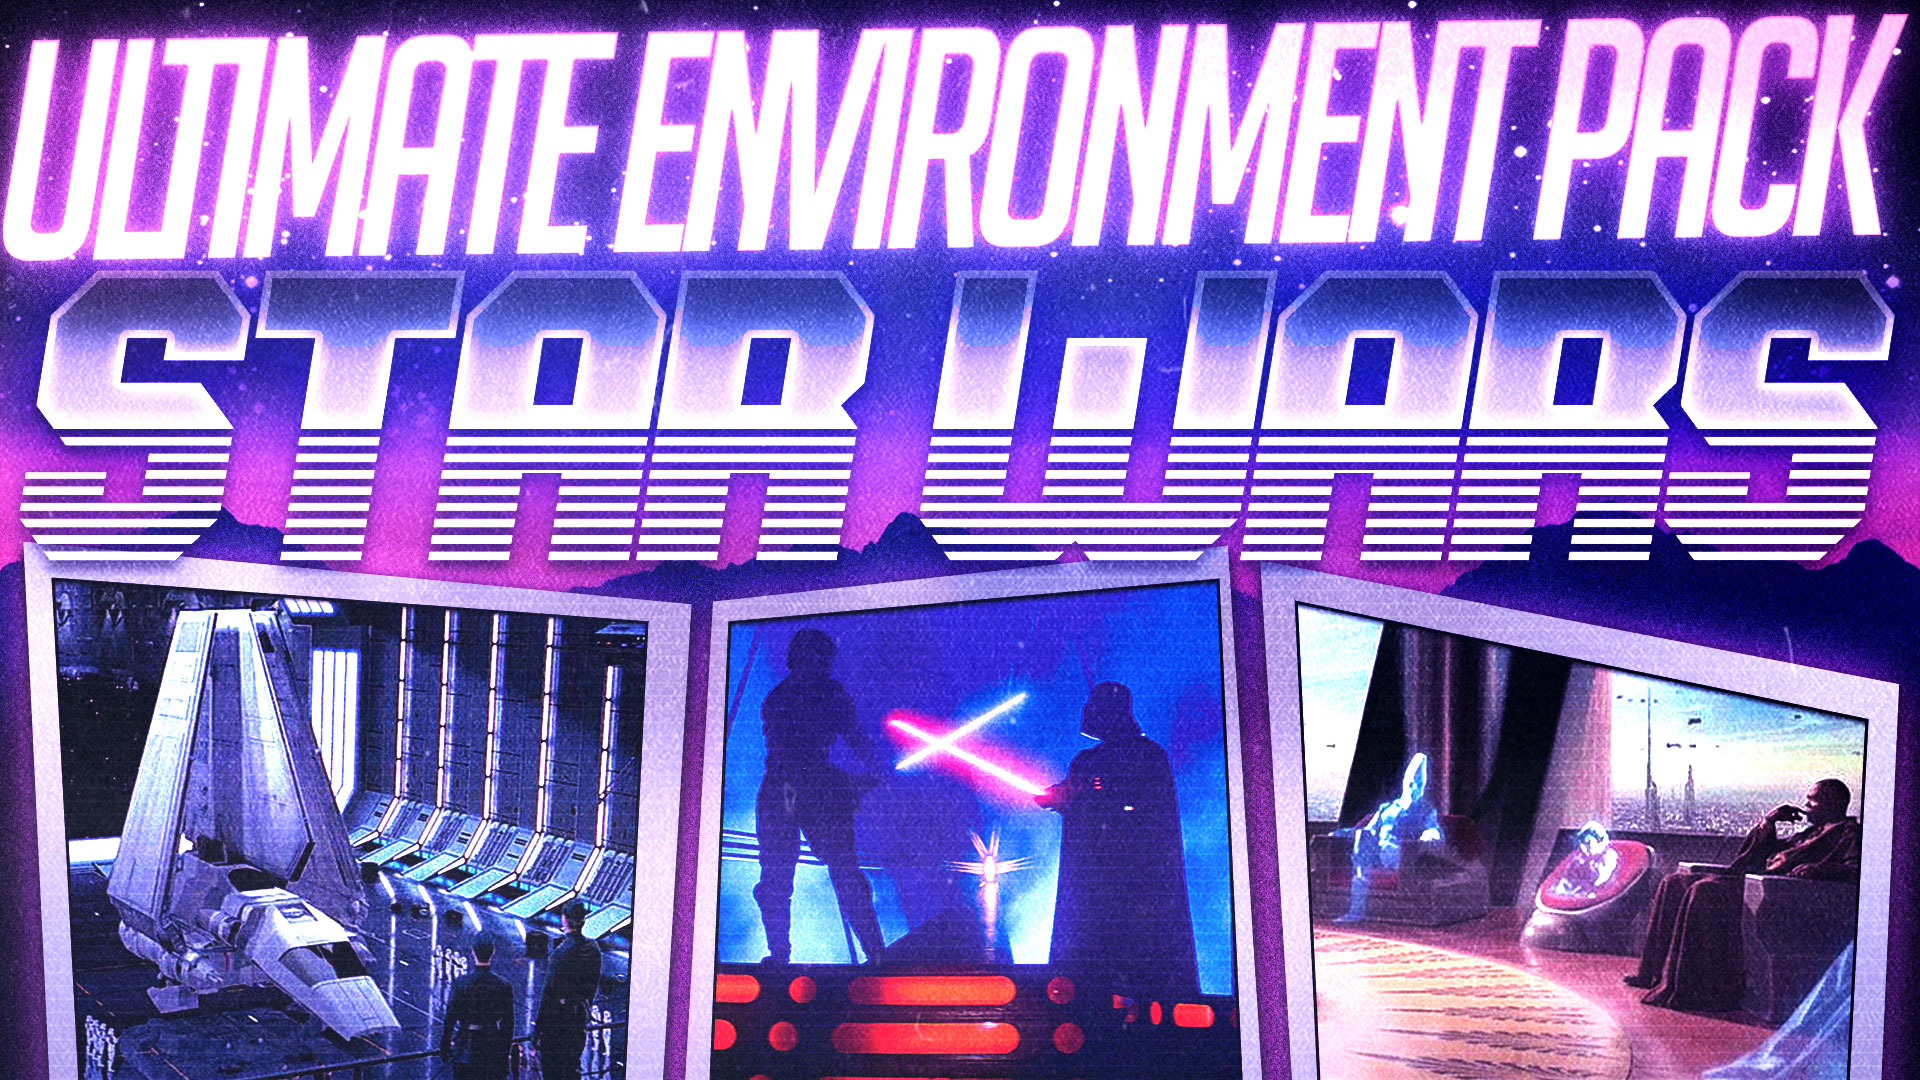 Star Wars | Ultimate Environments Pack